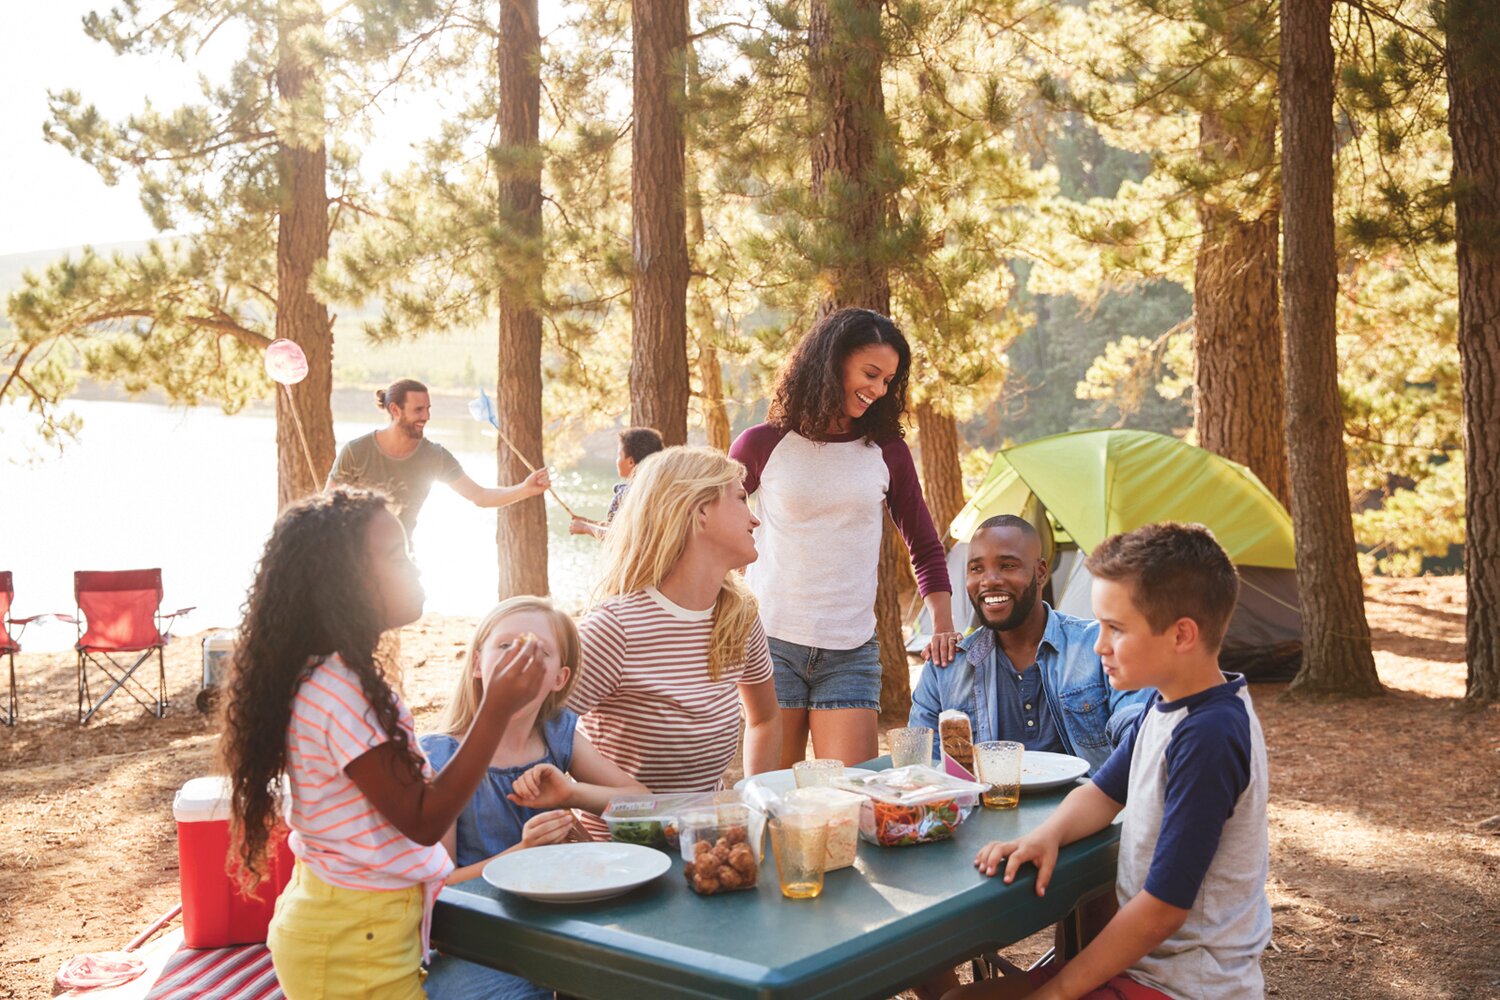 From beach barbecues to walks in the woods, here’s how to safeguard yourself against ticks and mosquitoes, so you can stay bug-free this summer for whatever takes you outside.
PHOTO SOURCE: (c) monkeybusinessimages / iStock via Getty Images Plus